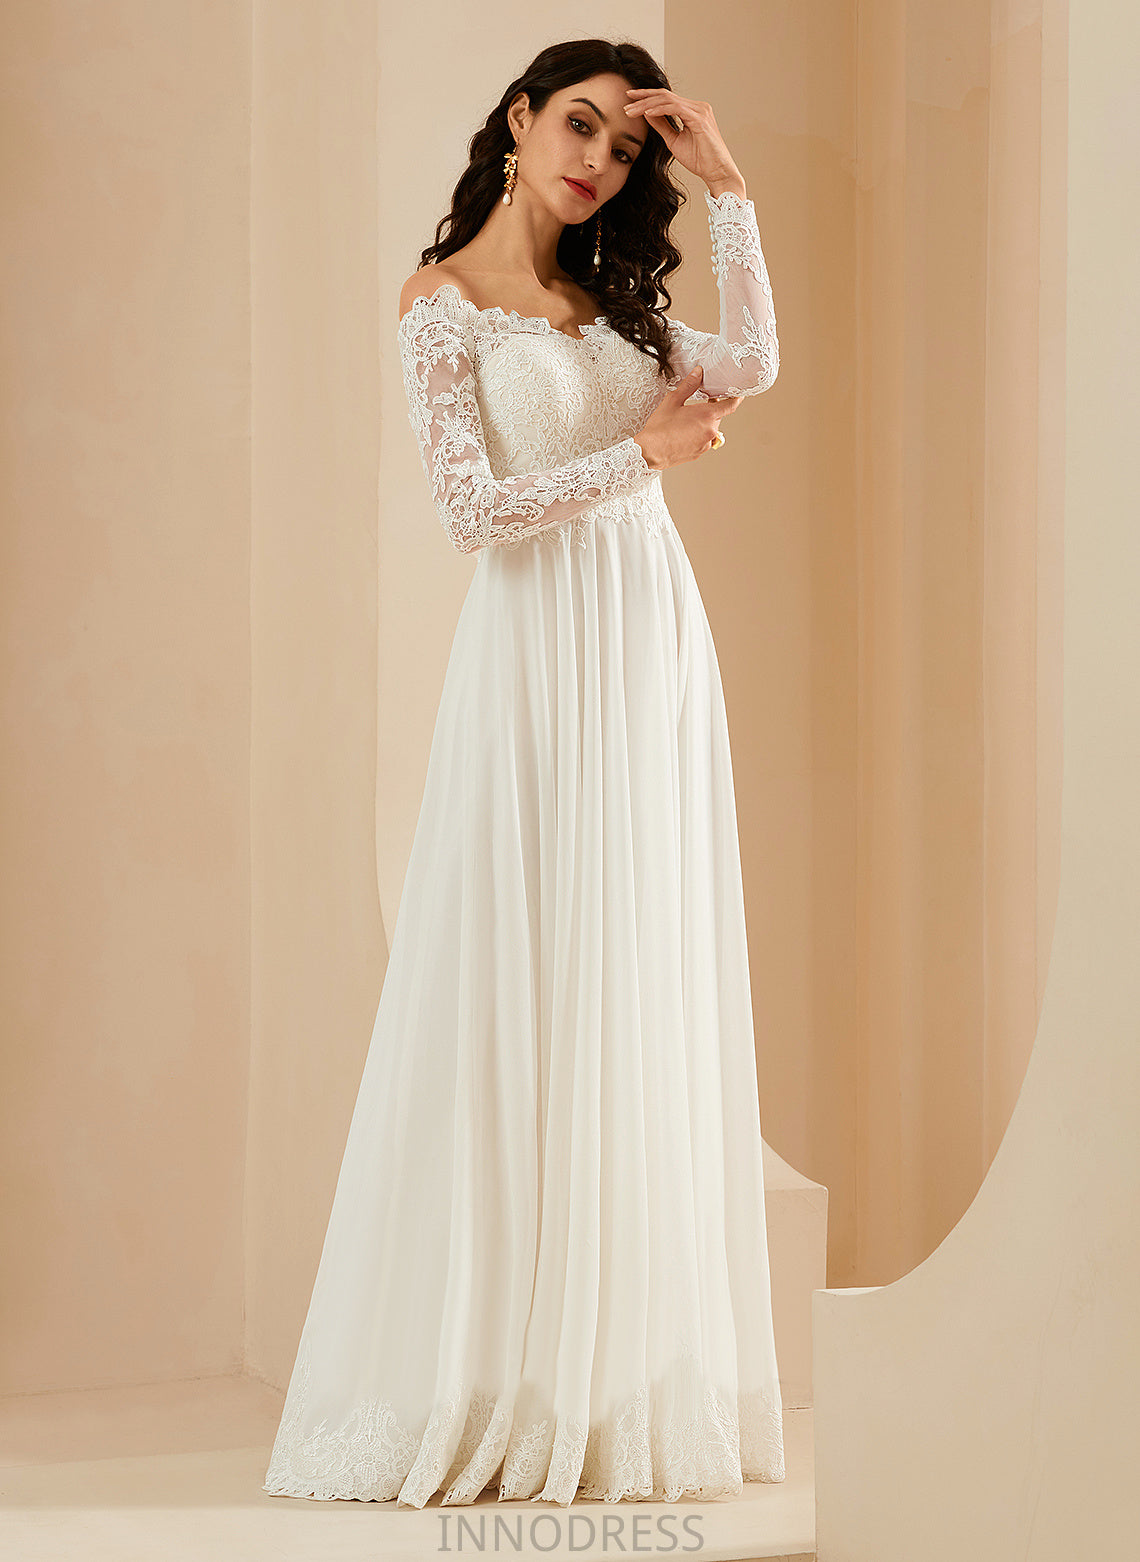 With Off-the-Shoulder Dress Lace Wedding Dresses Chiffon A-Line Millicent Train Wedding Sweep